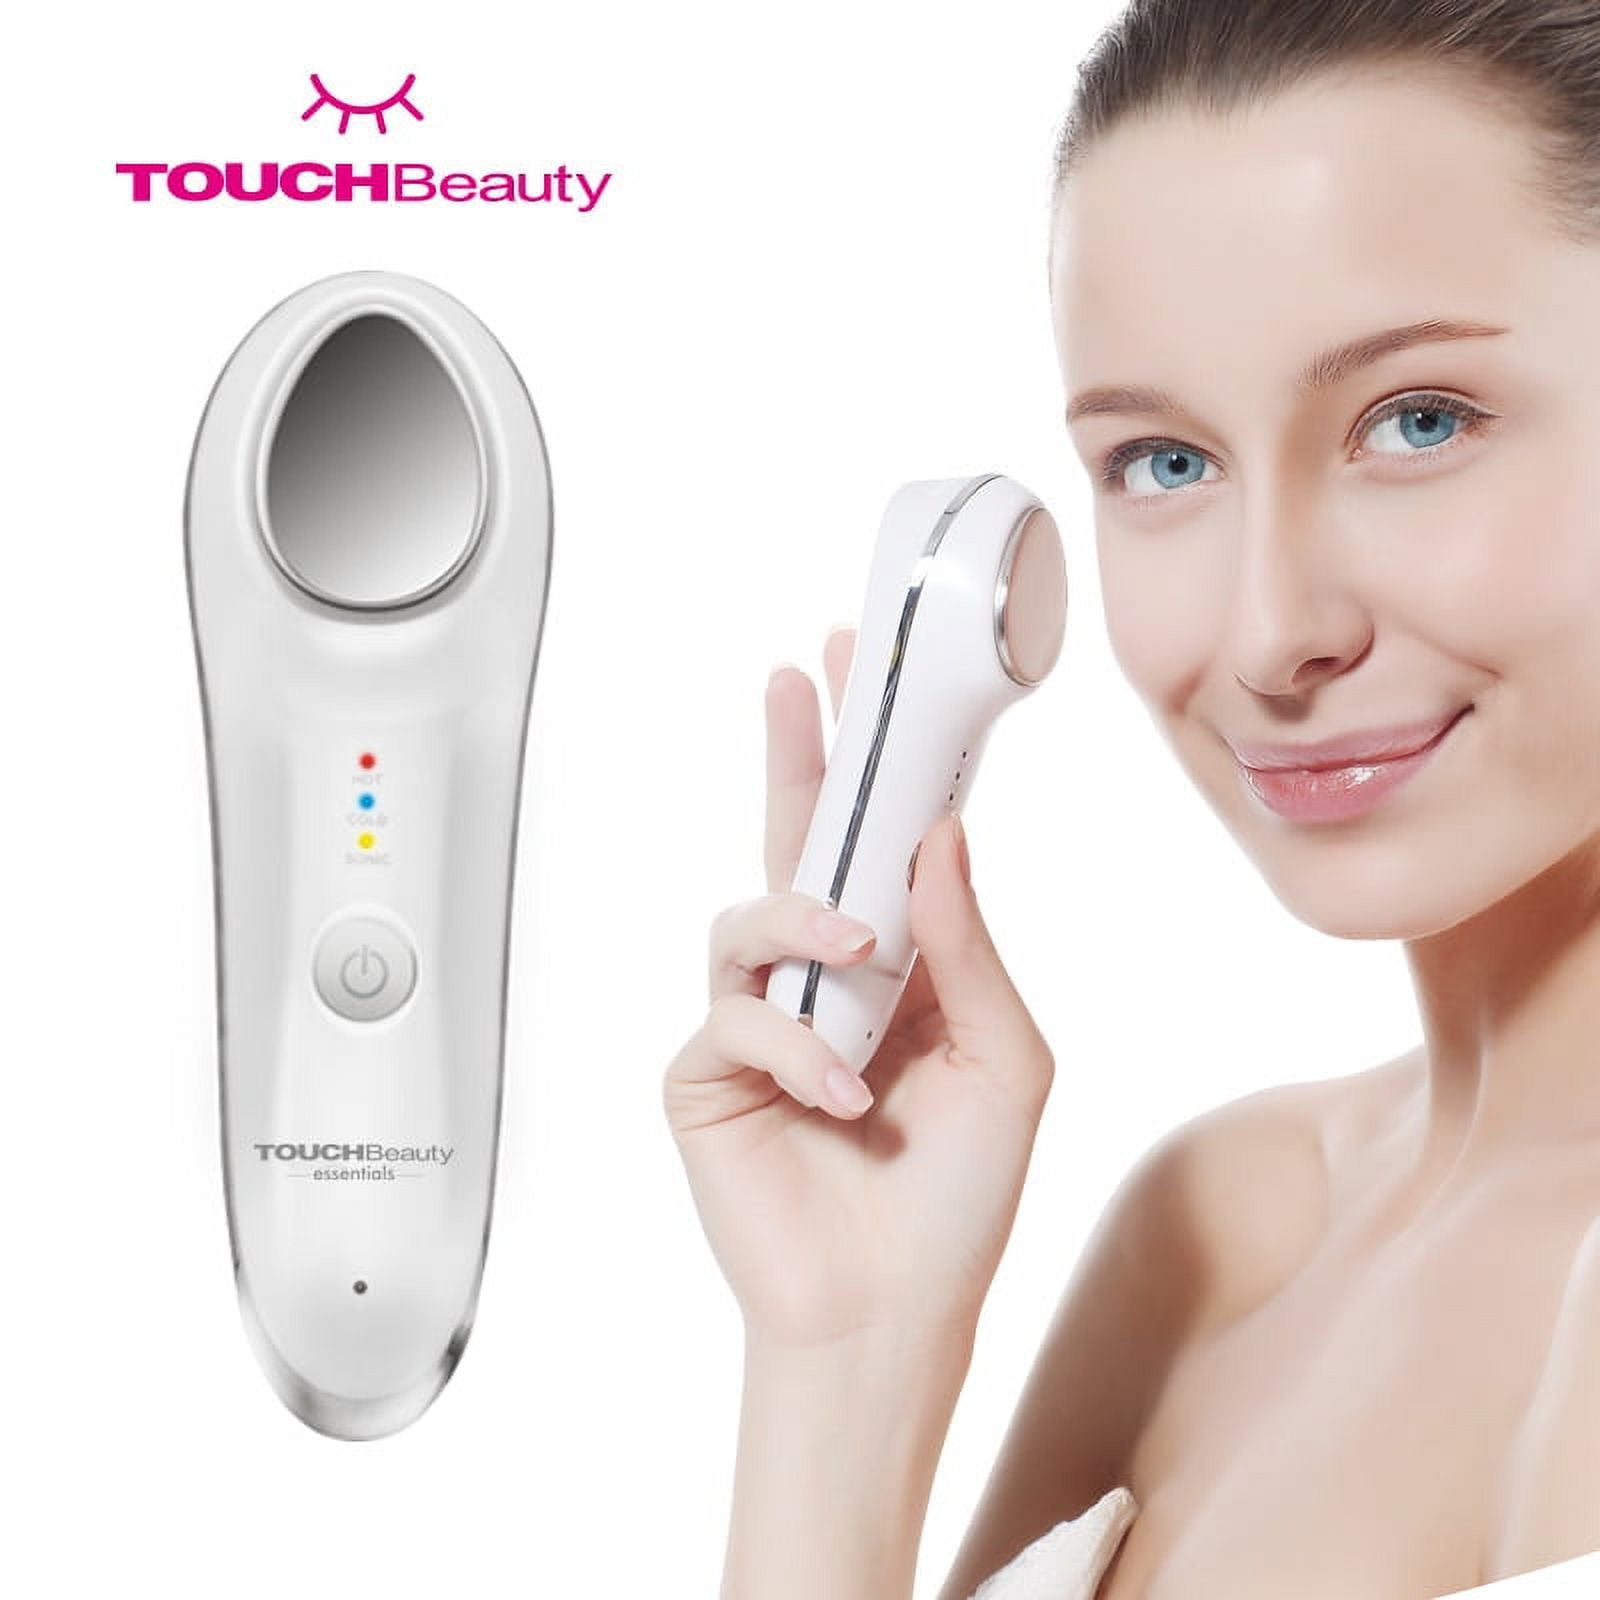 Elegant Home TB-1389 & Hot Fashions Touch Cool Massager Beauty